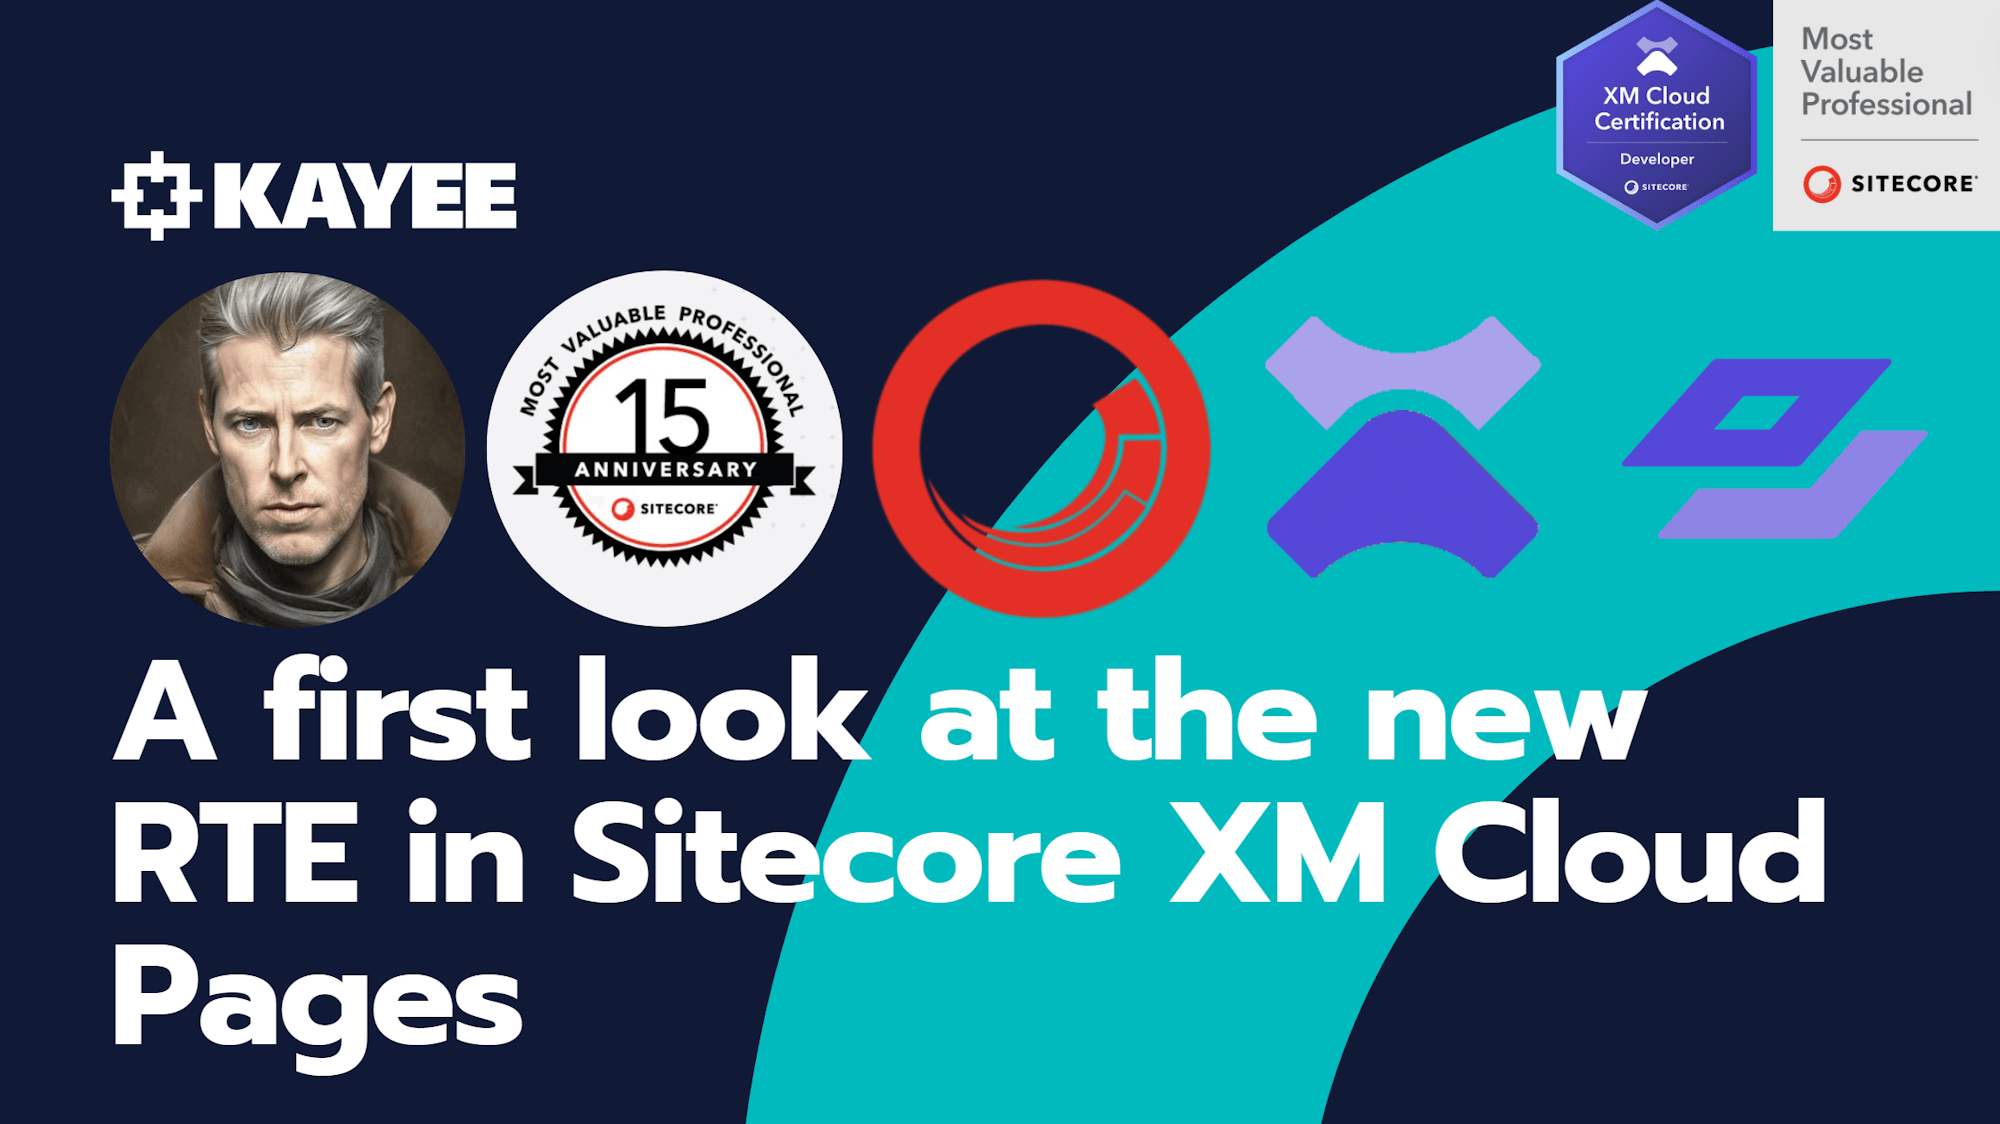 A first look at the new RTE in Sitecore XM Cloud Pages